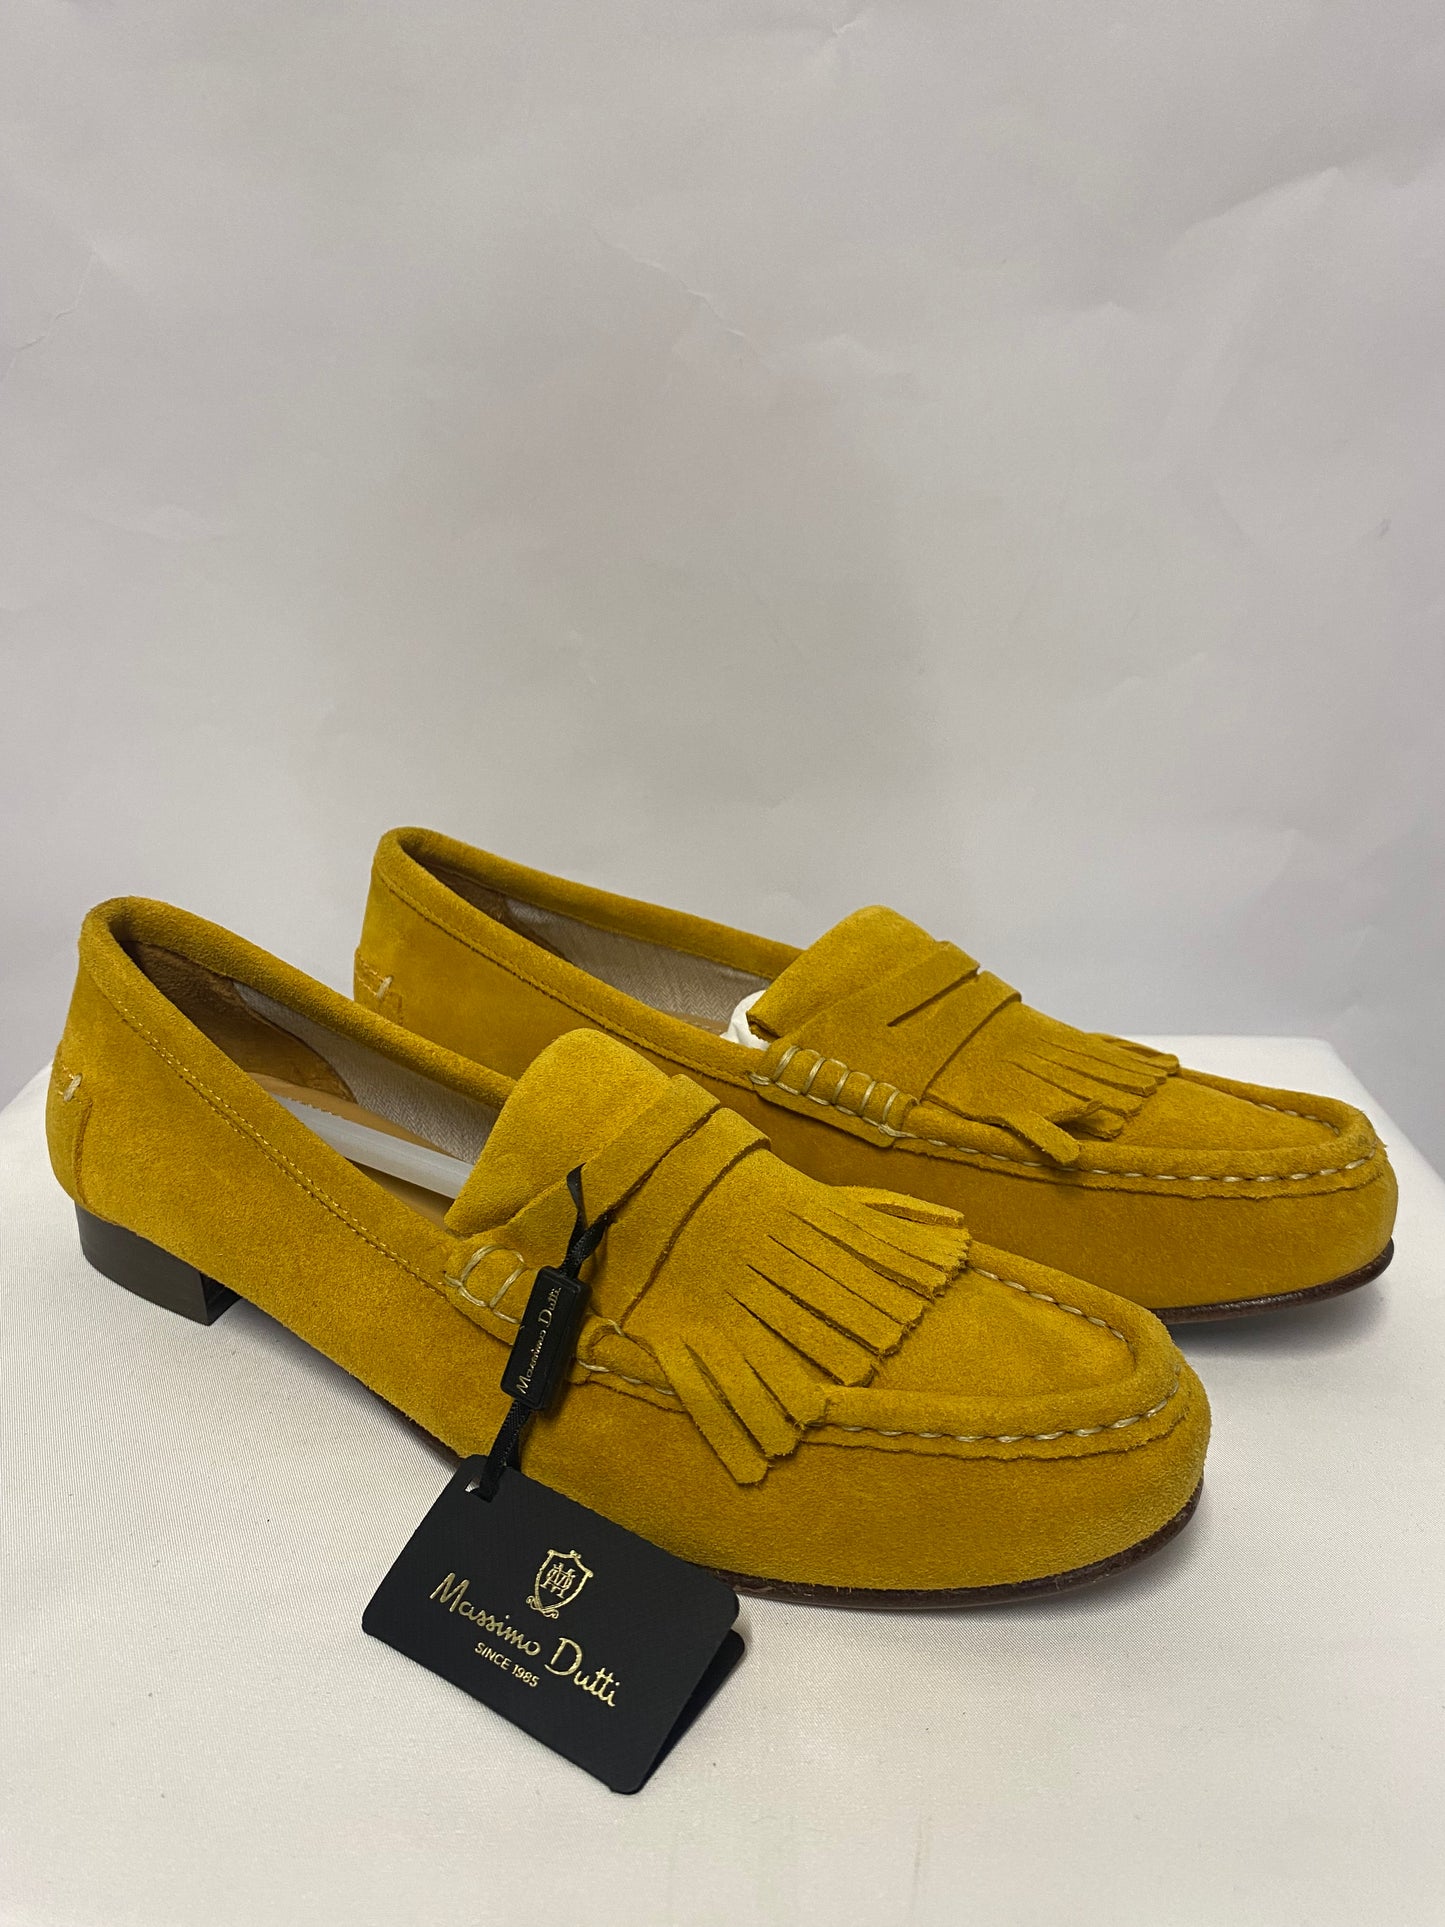 Massimo Dutti Mustard Yellow Fringed Suede Loafers 8 BNWT